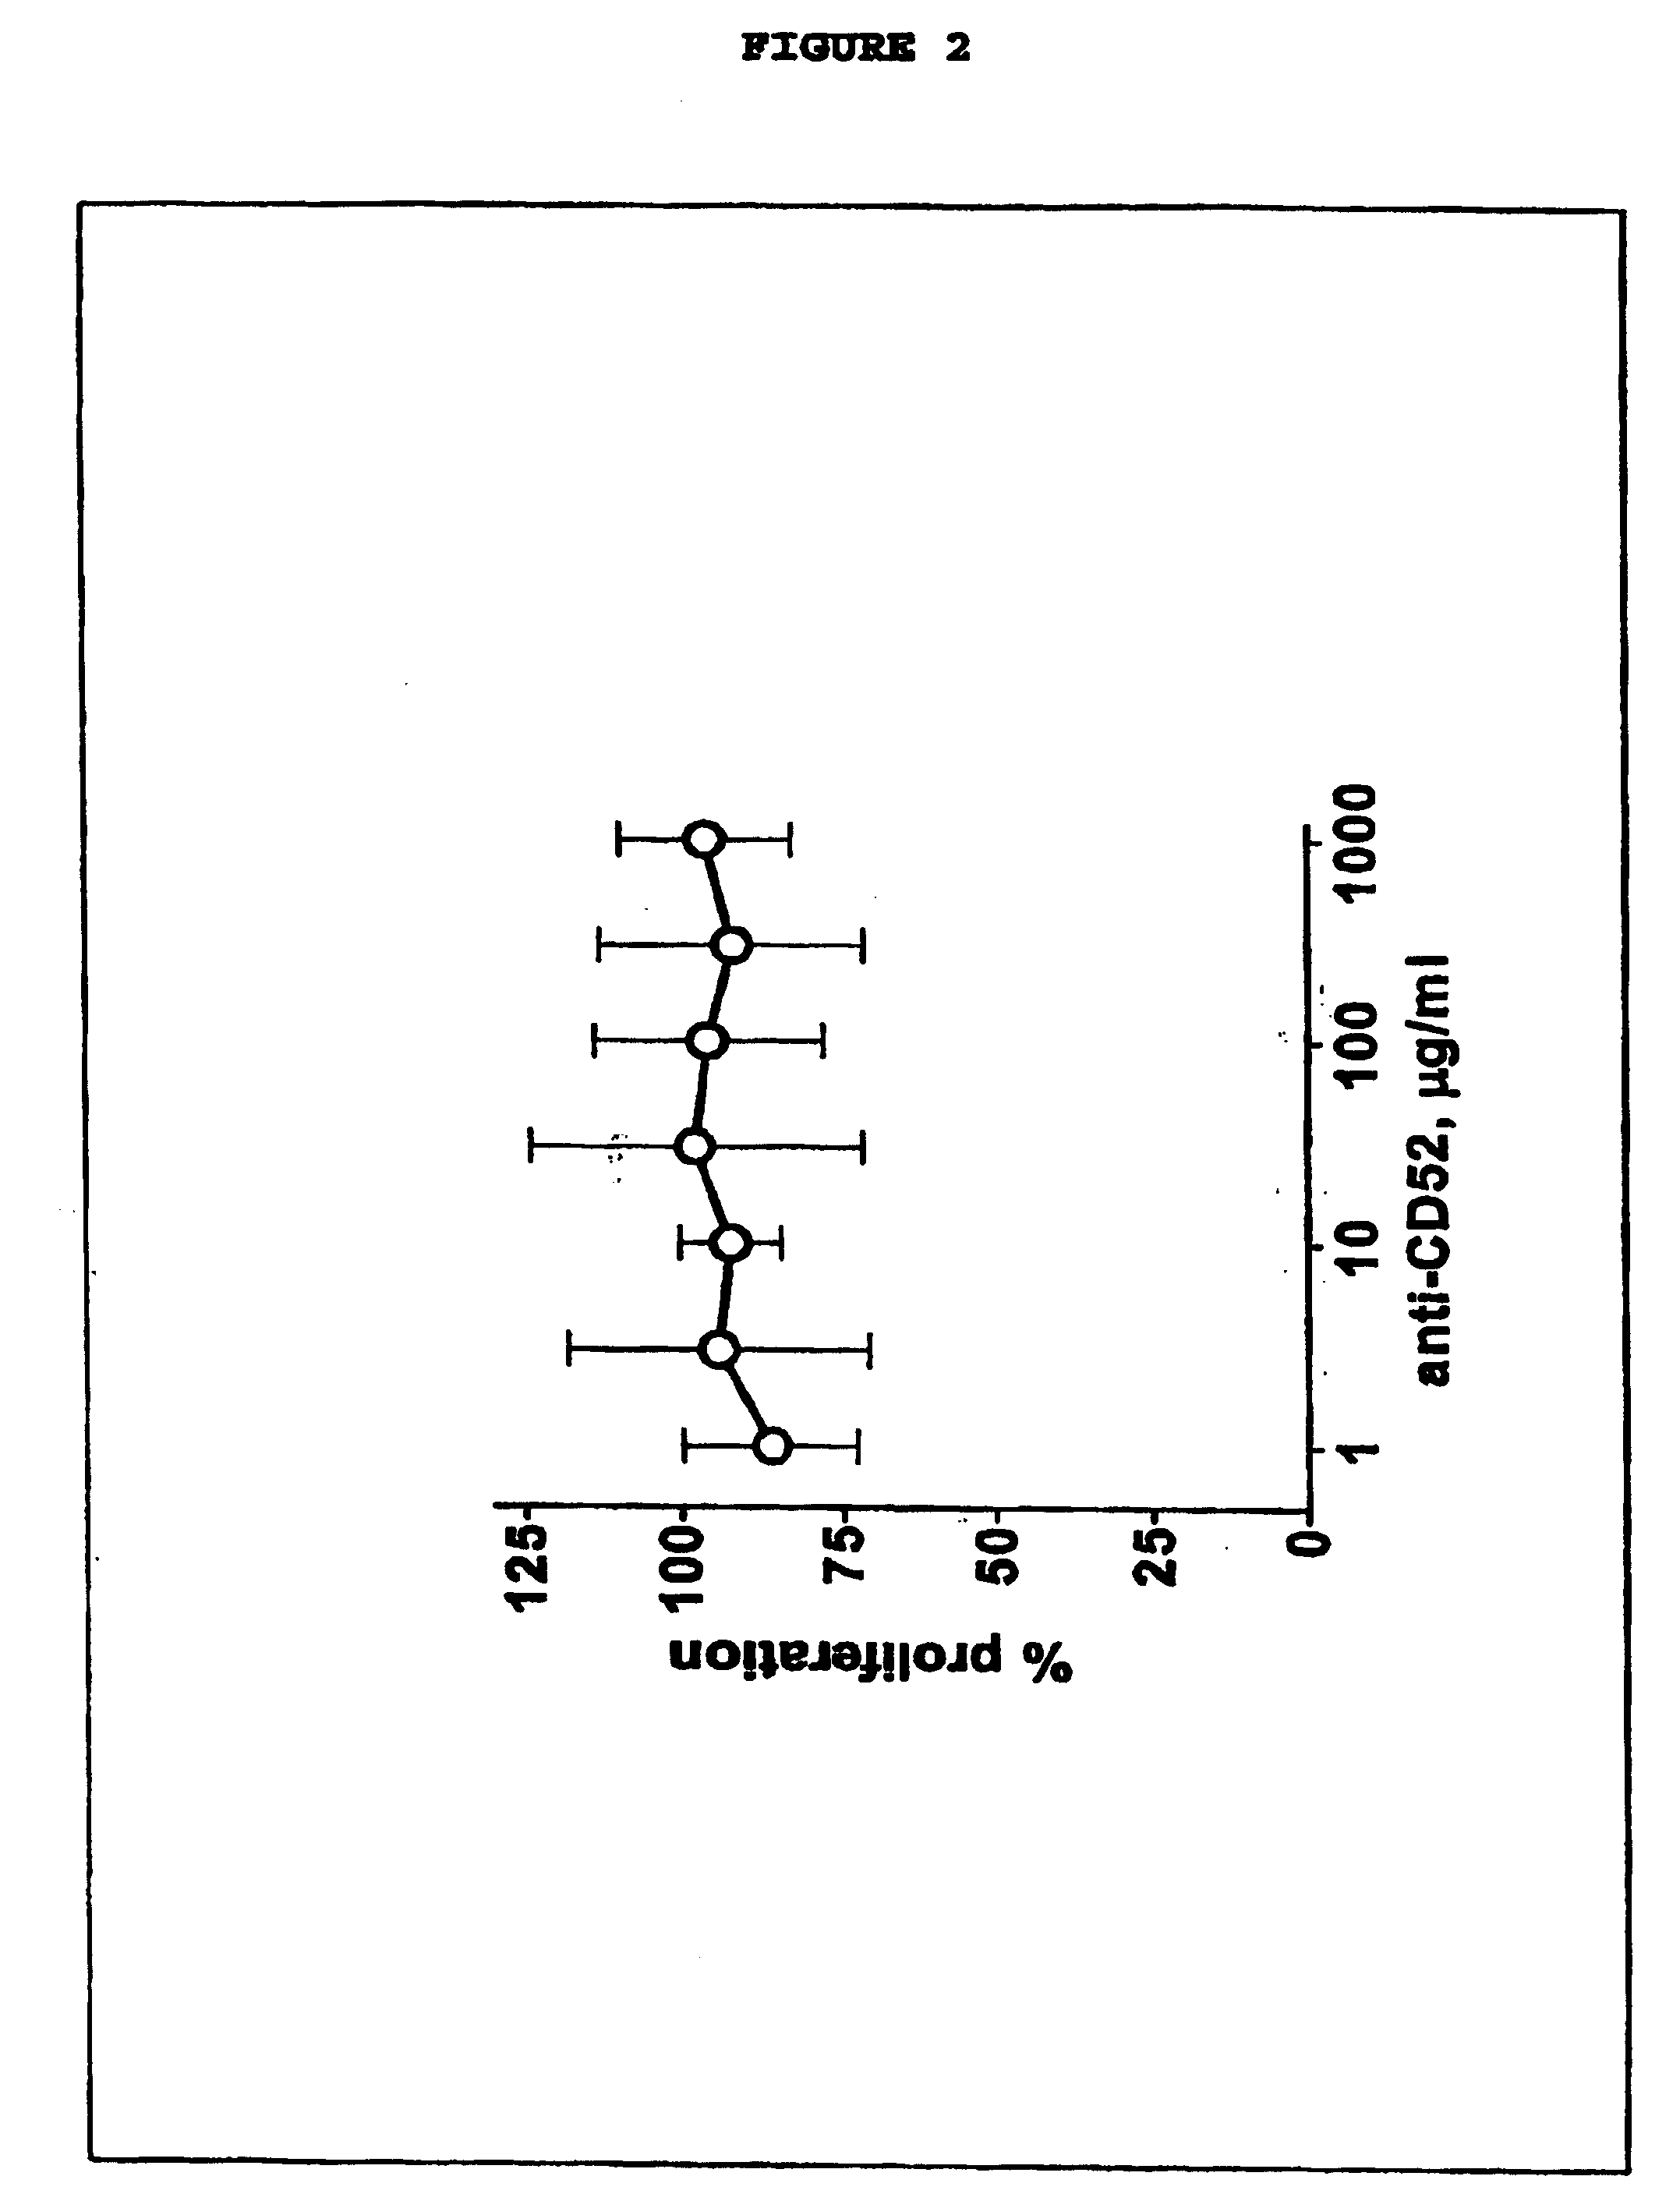 Selective elimination of cd52and uses thereof